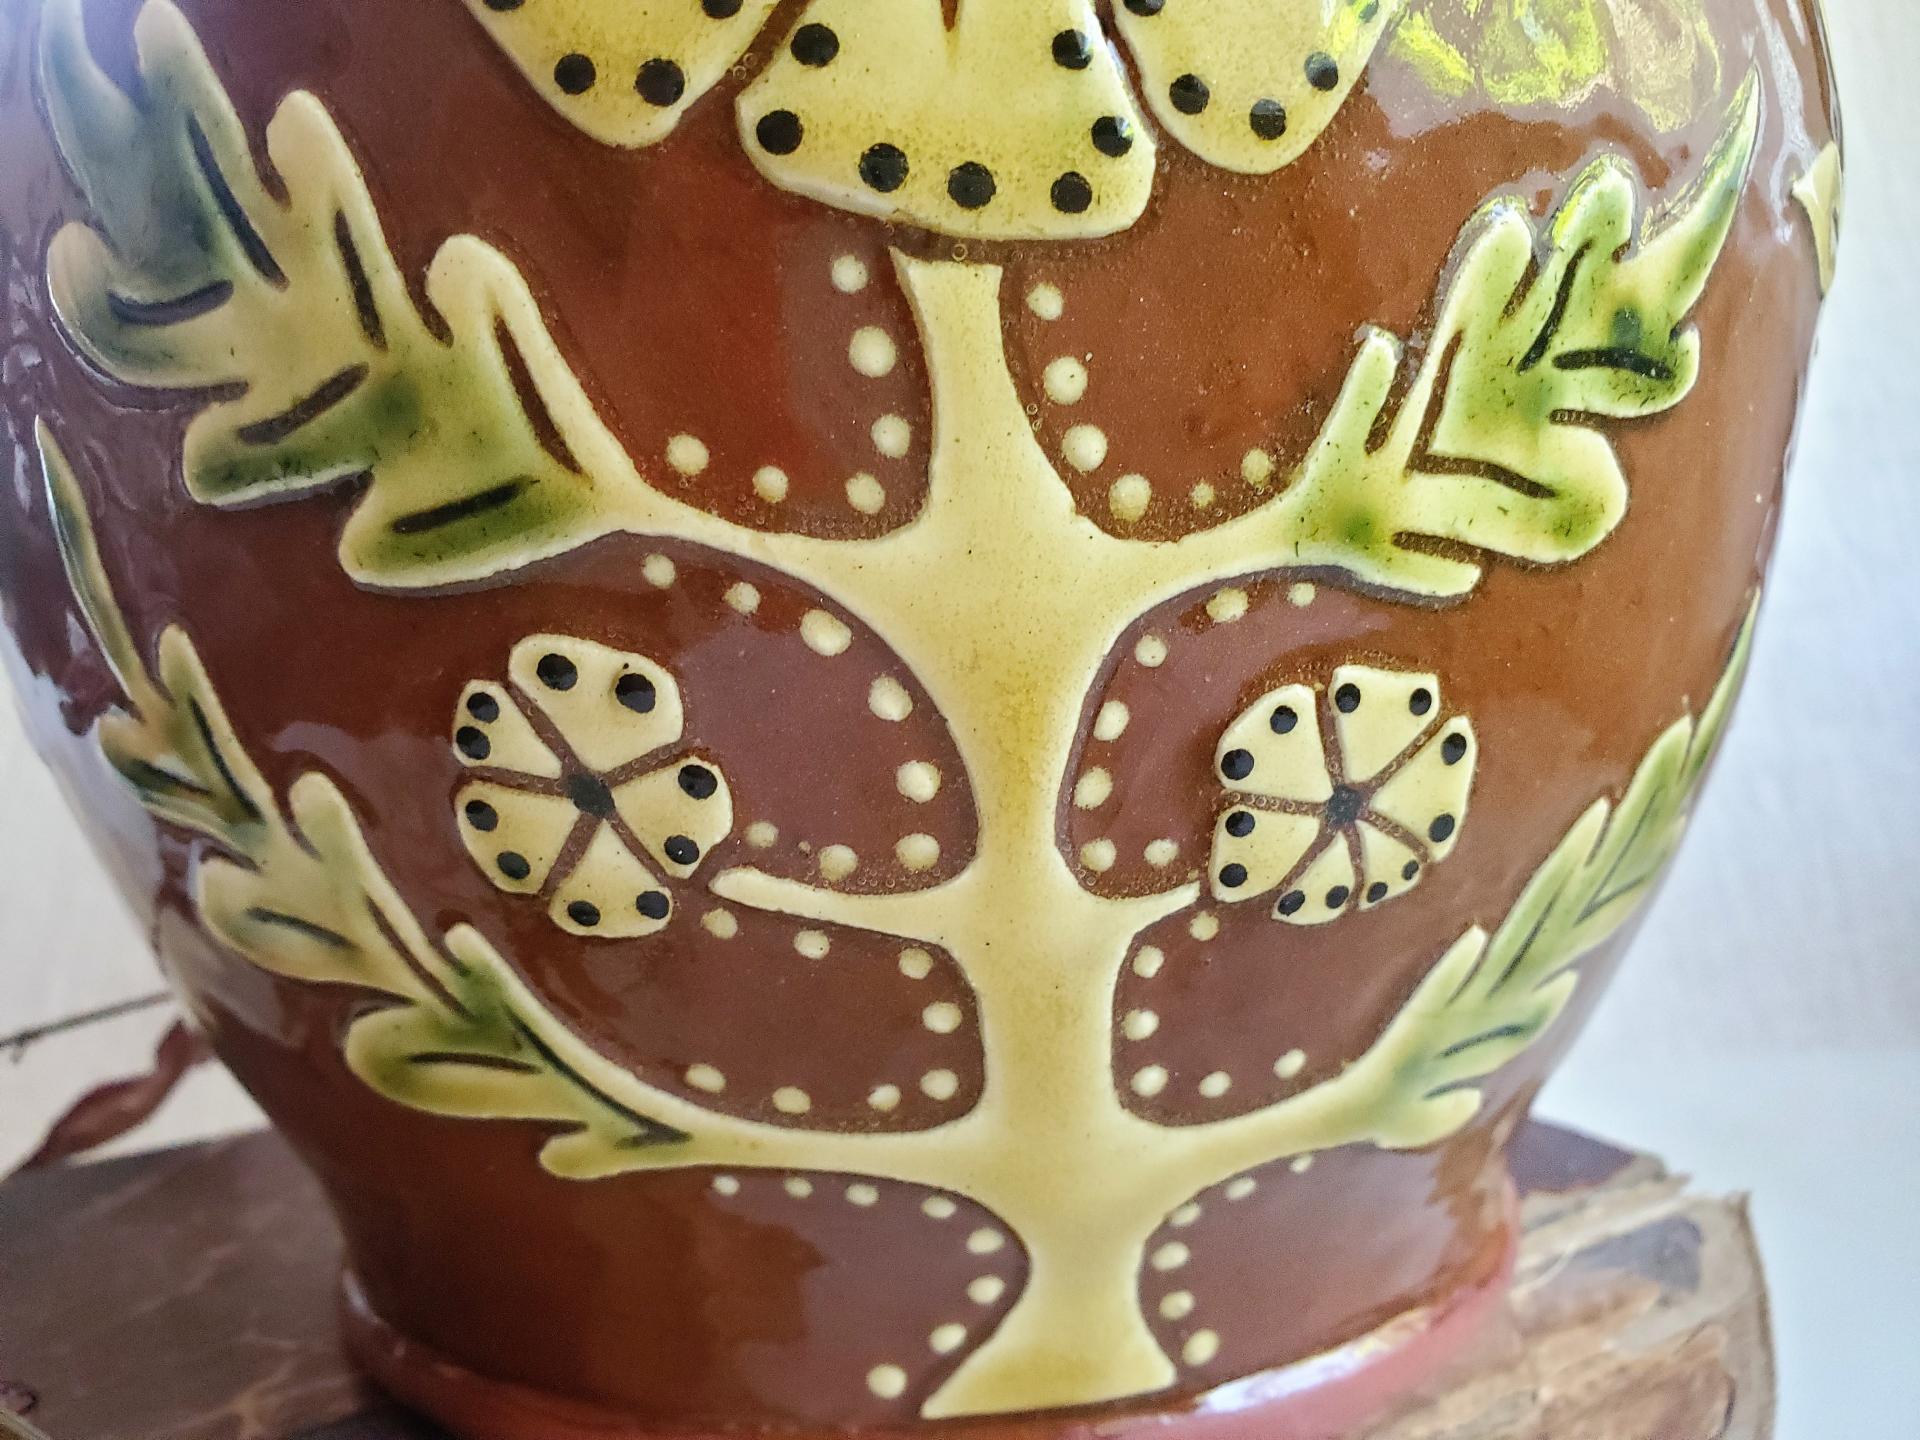 Sgraffito Redware One-of-a-Kind Jar with Traditional Pattern and Lead Free Glaze